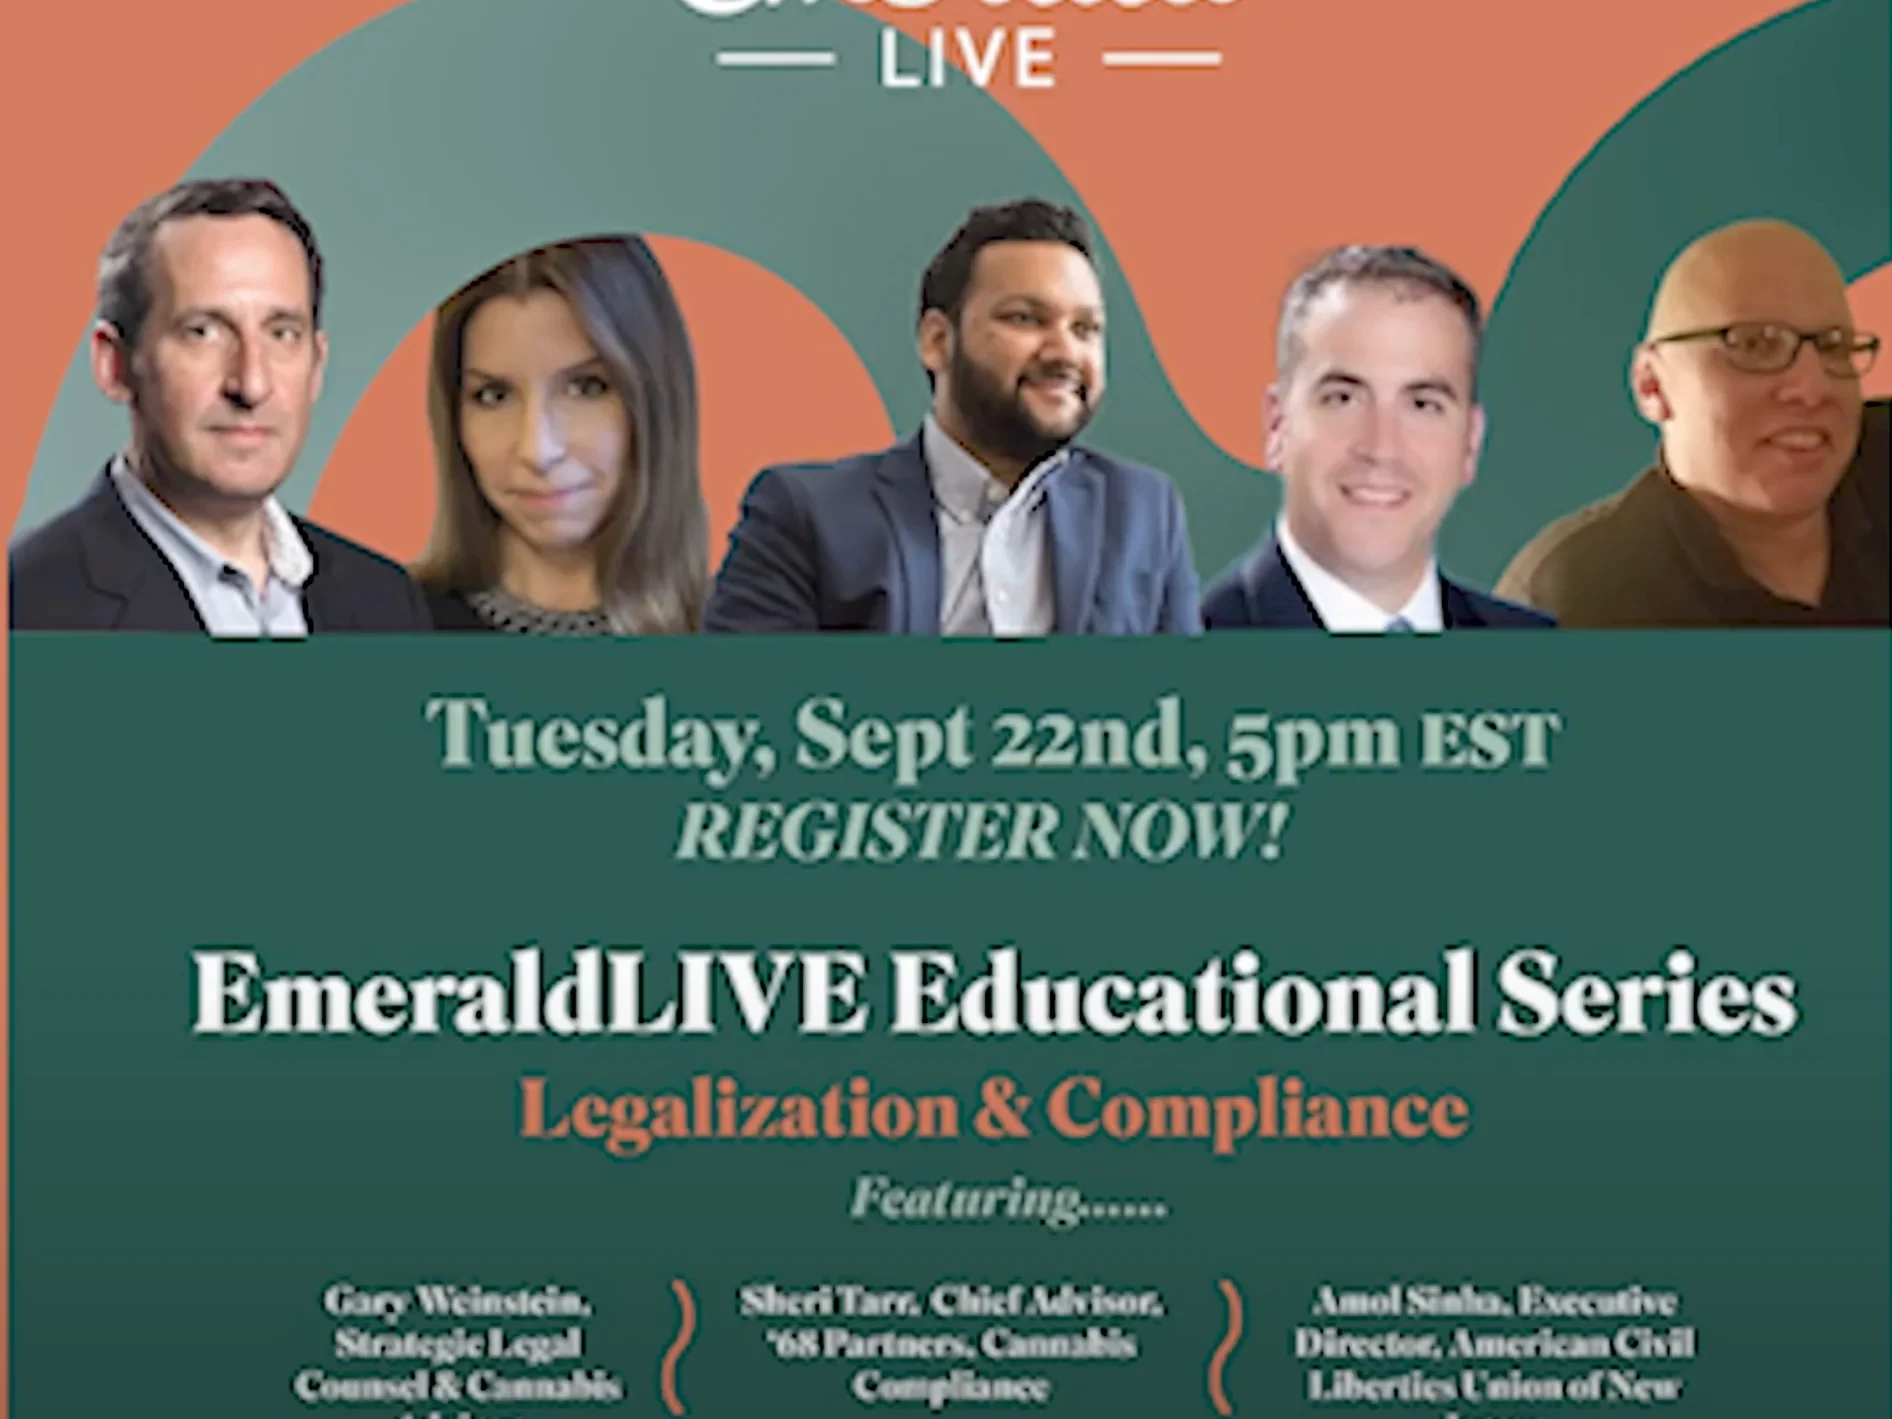 'EmeraldLIVE: Legalization & Compliance' flyer for the Tuesday, September 22, 2020 virtual conference taking place at 5p EST with Gary Weinstein, Sheri Tarr, and Amol.